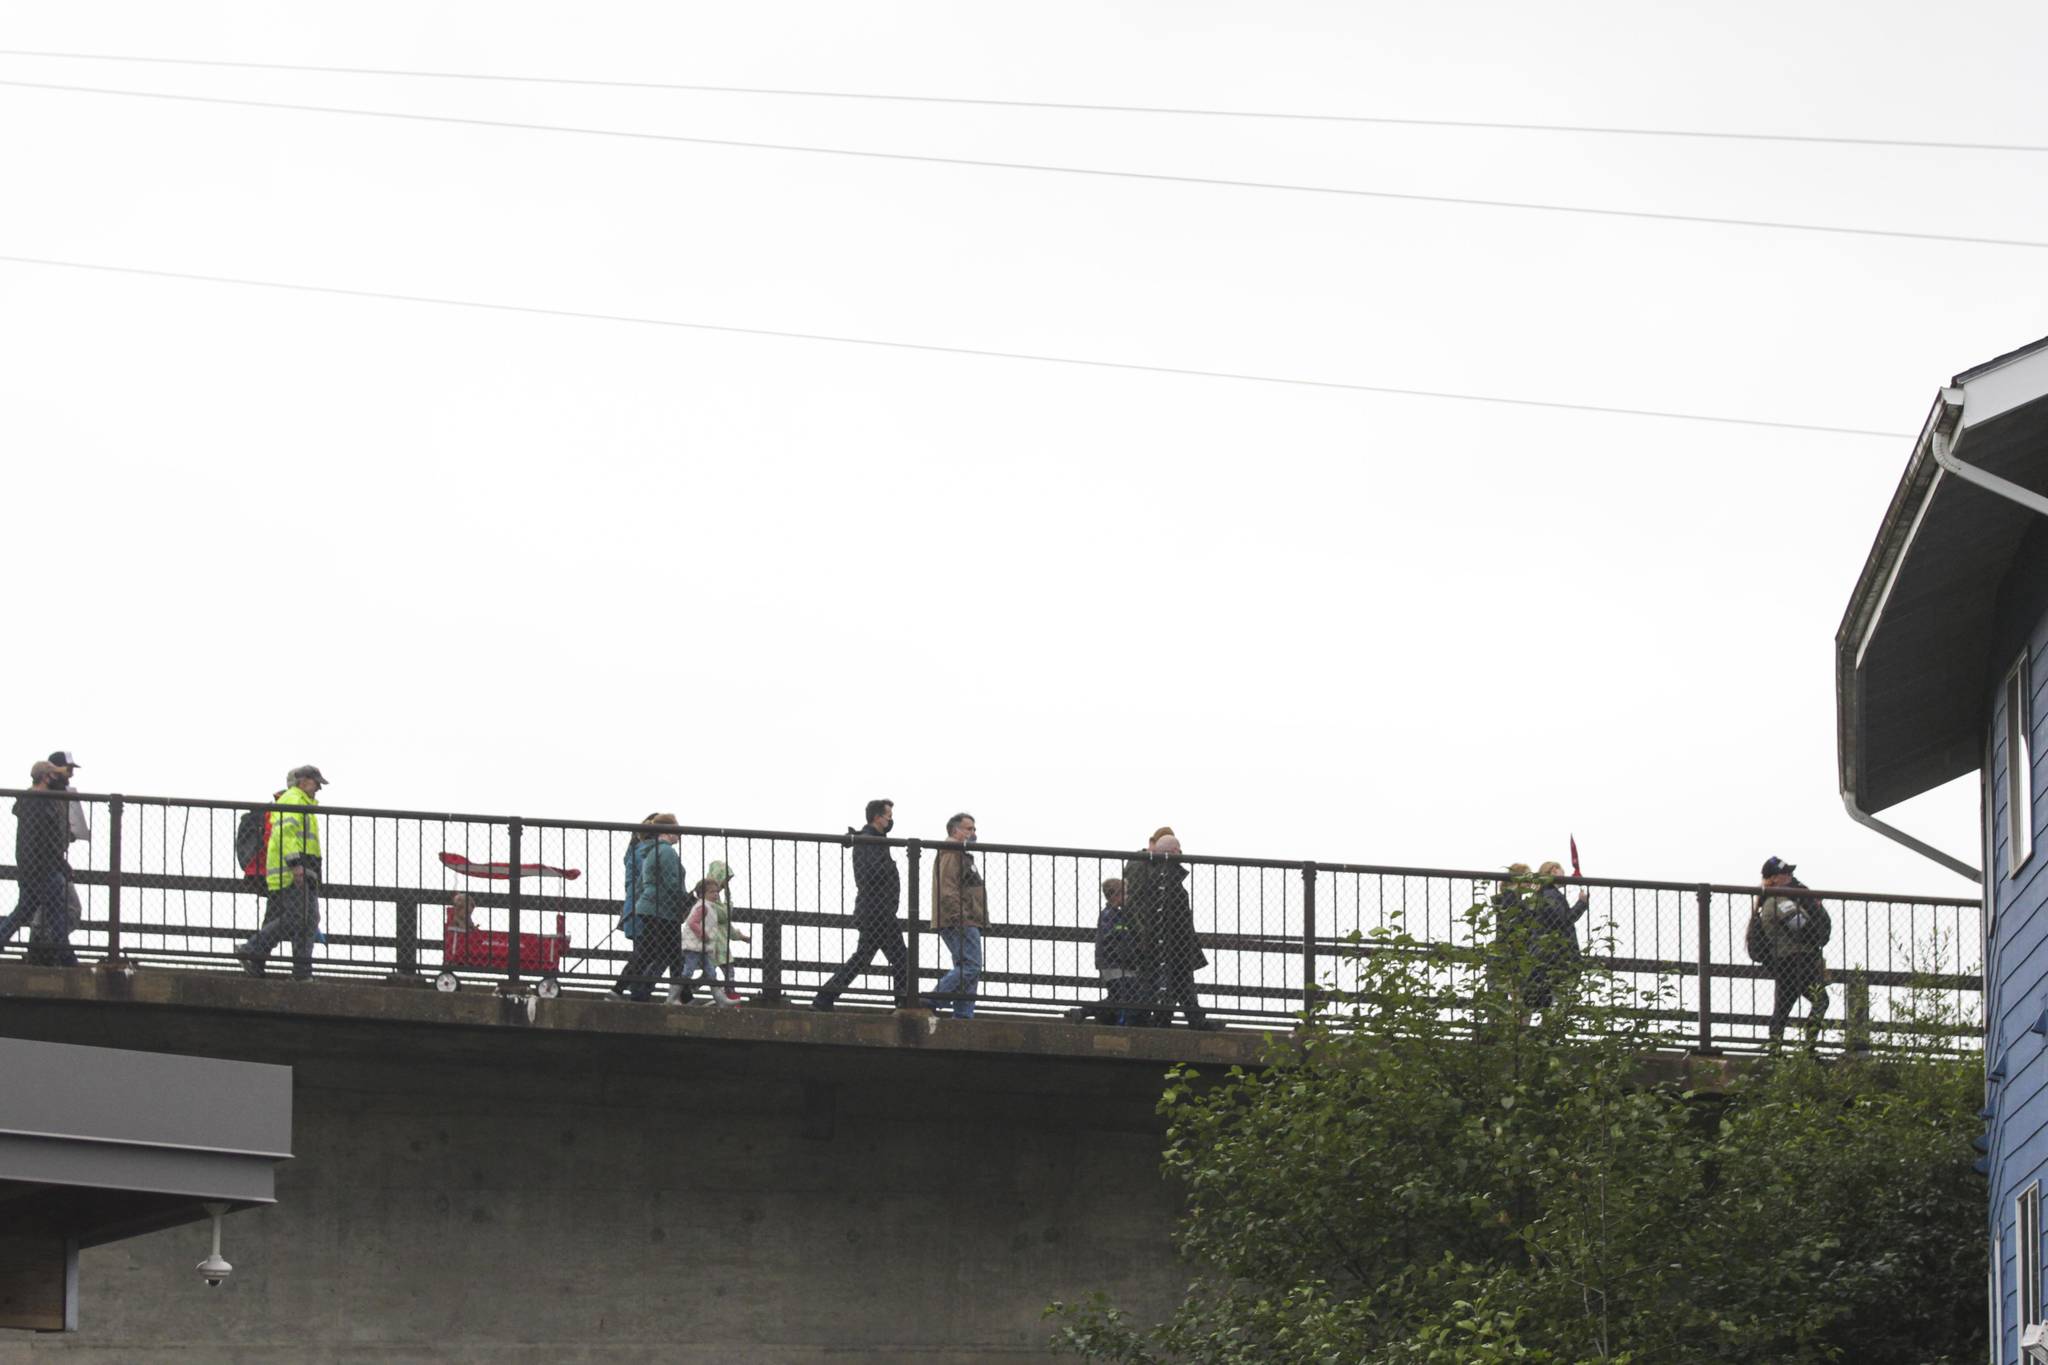 Juneau residents and veterans gathered on Tuesday, Aug. 24, 2021 for Together with Juneau Veterans’ first Walk with a Vet event across the Douglas Bridge. (Michael S. Lockett / Juneau Empire)